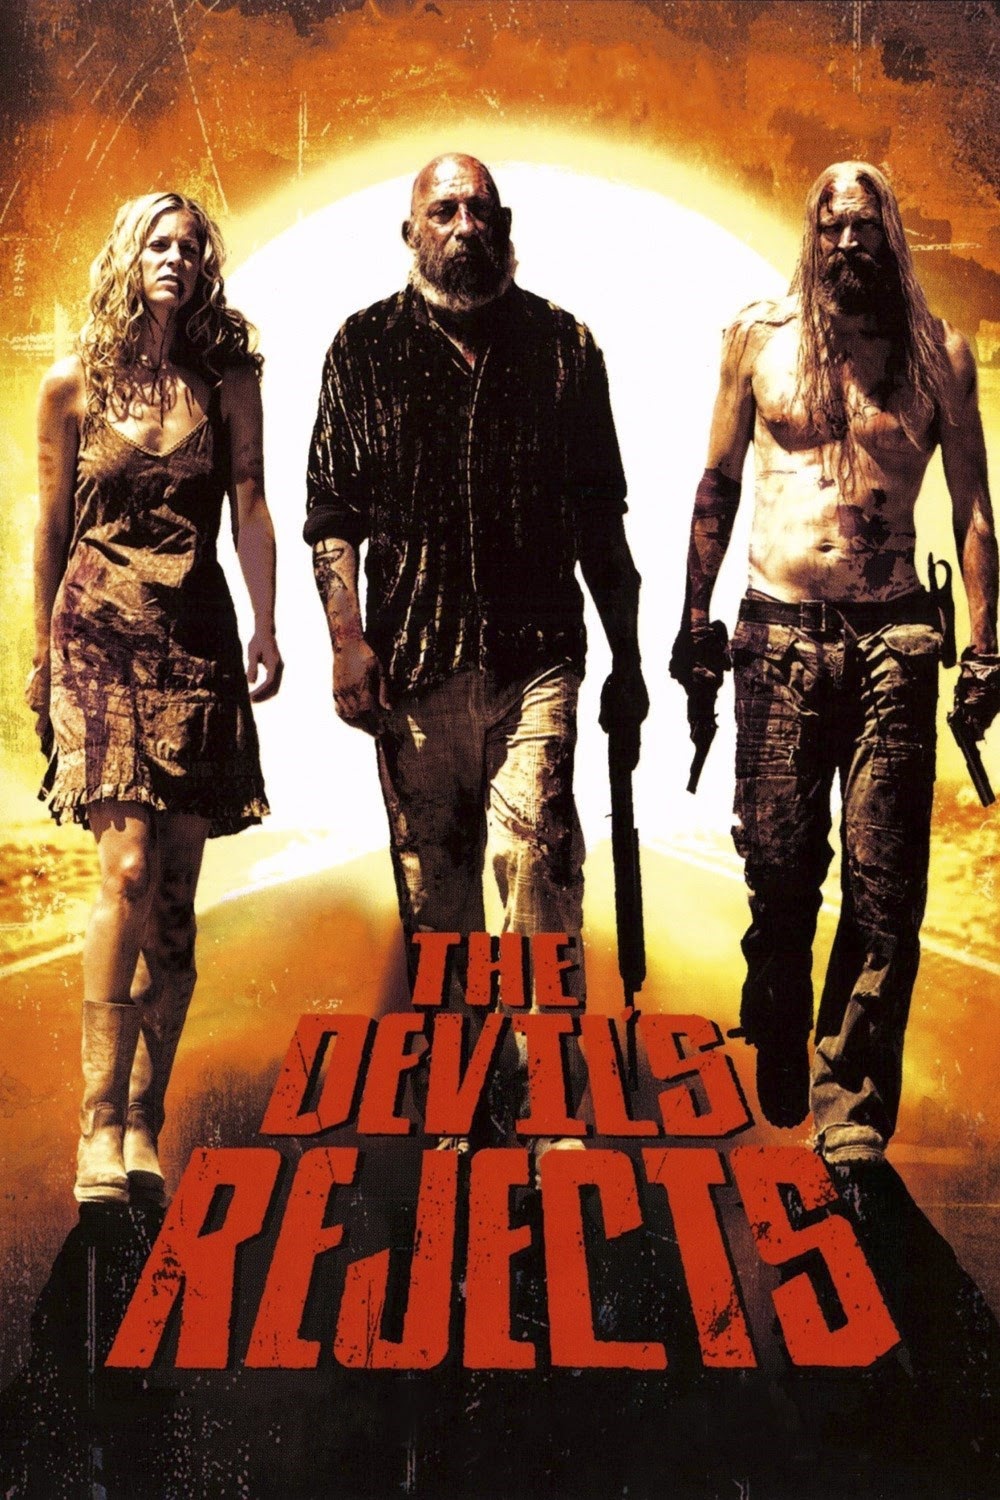 The Devil's Rejects 2005 - Full (HD)